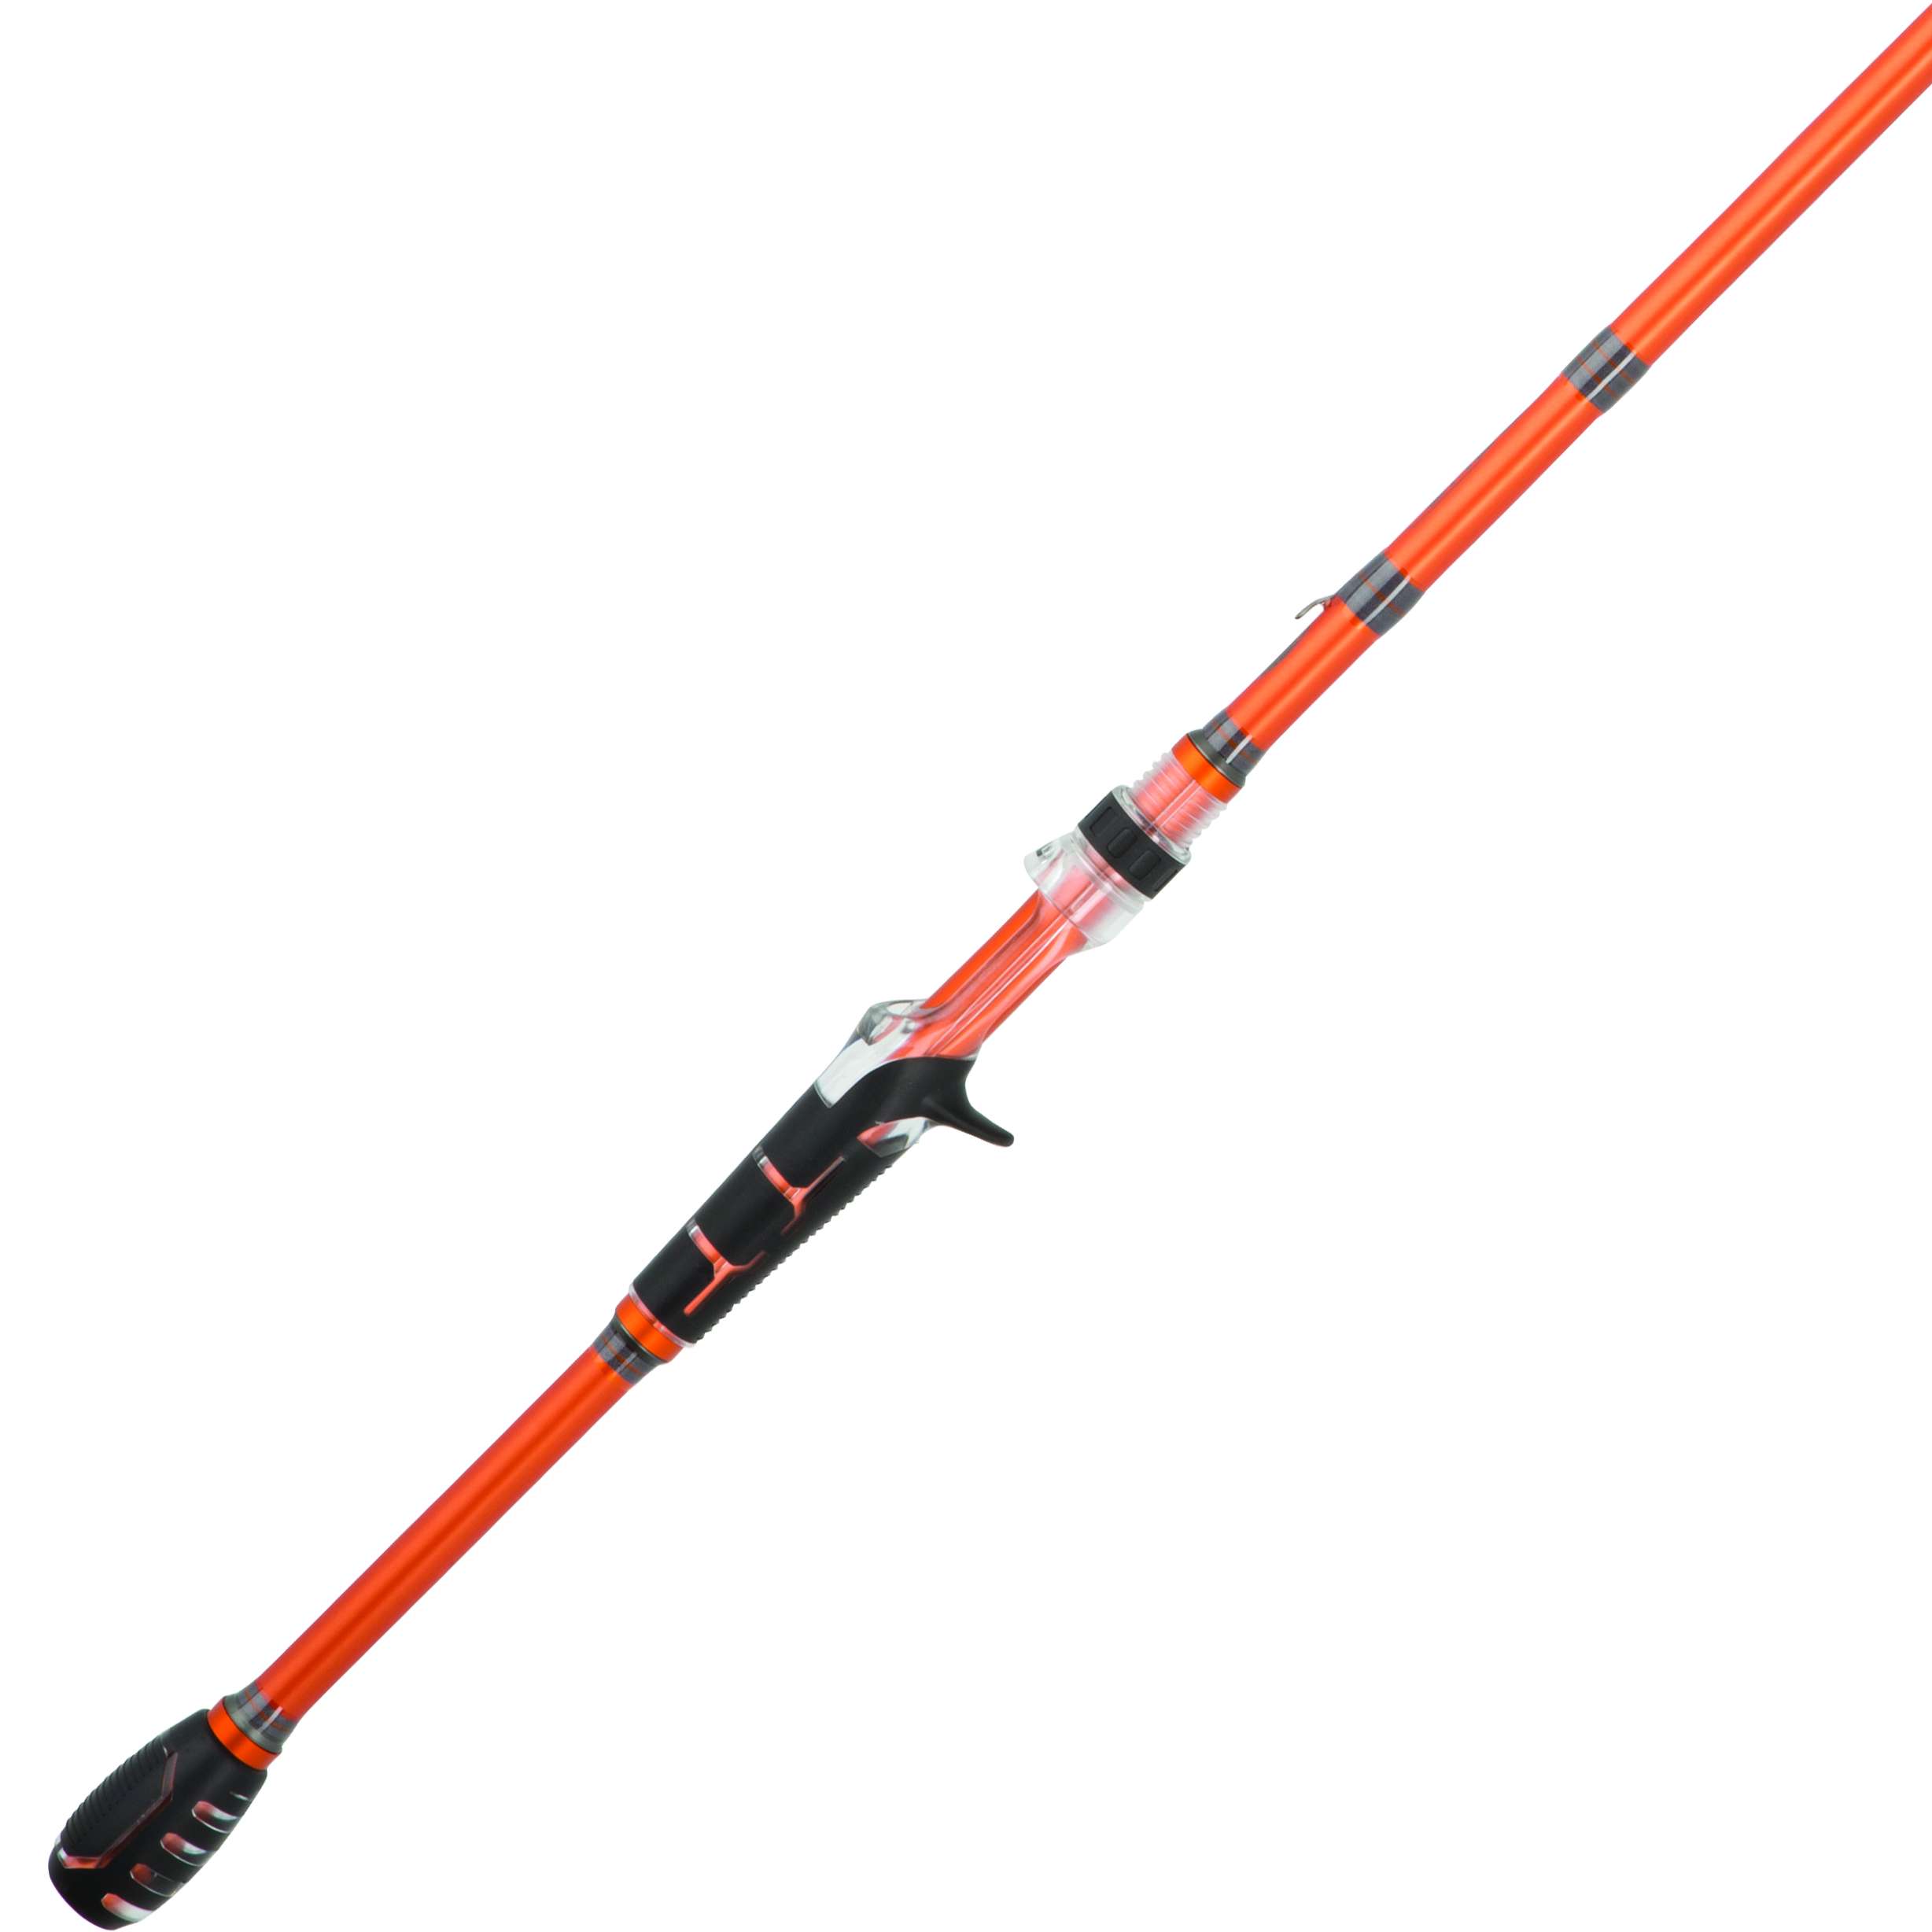 Berkley Lightning Rod Shock<BR>
Designed with slower actions and more backbone along with guides that are resistant to line grooving, Berkley Lightning Rod Shock rods help ensure anglers get the most out of fishing with braided lines.